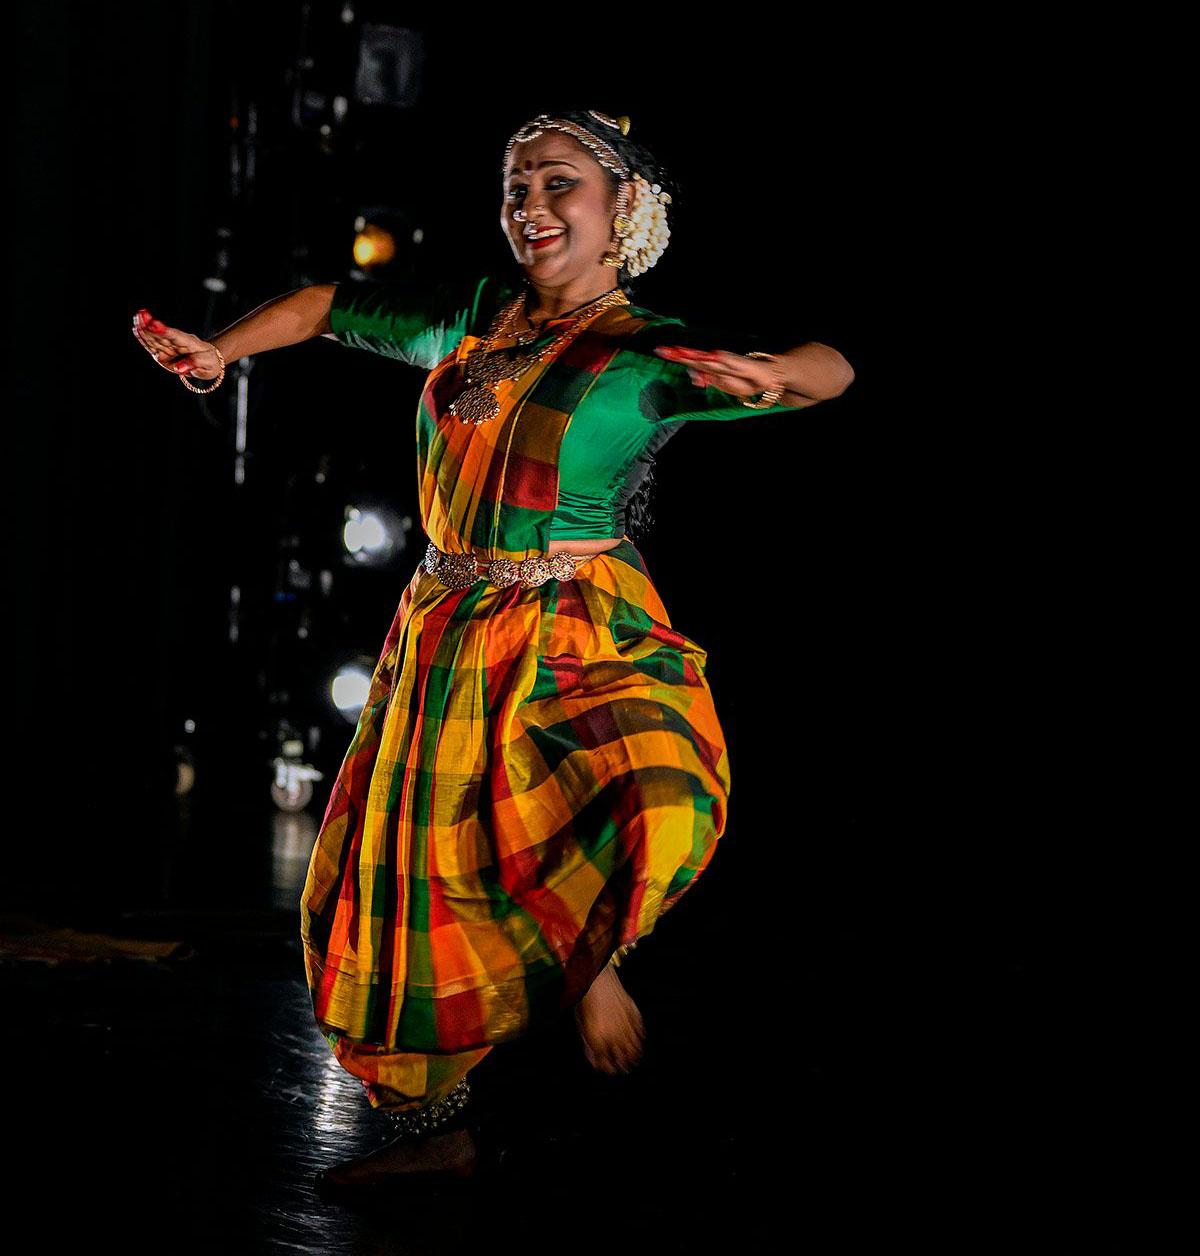 The woman Indian dancer jumps jubilantily. we notice not only her bejeweled hair but the rich green silk blouse and her madras checked skirt and scarf. 